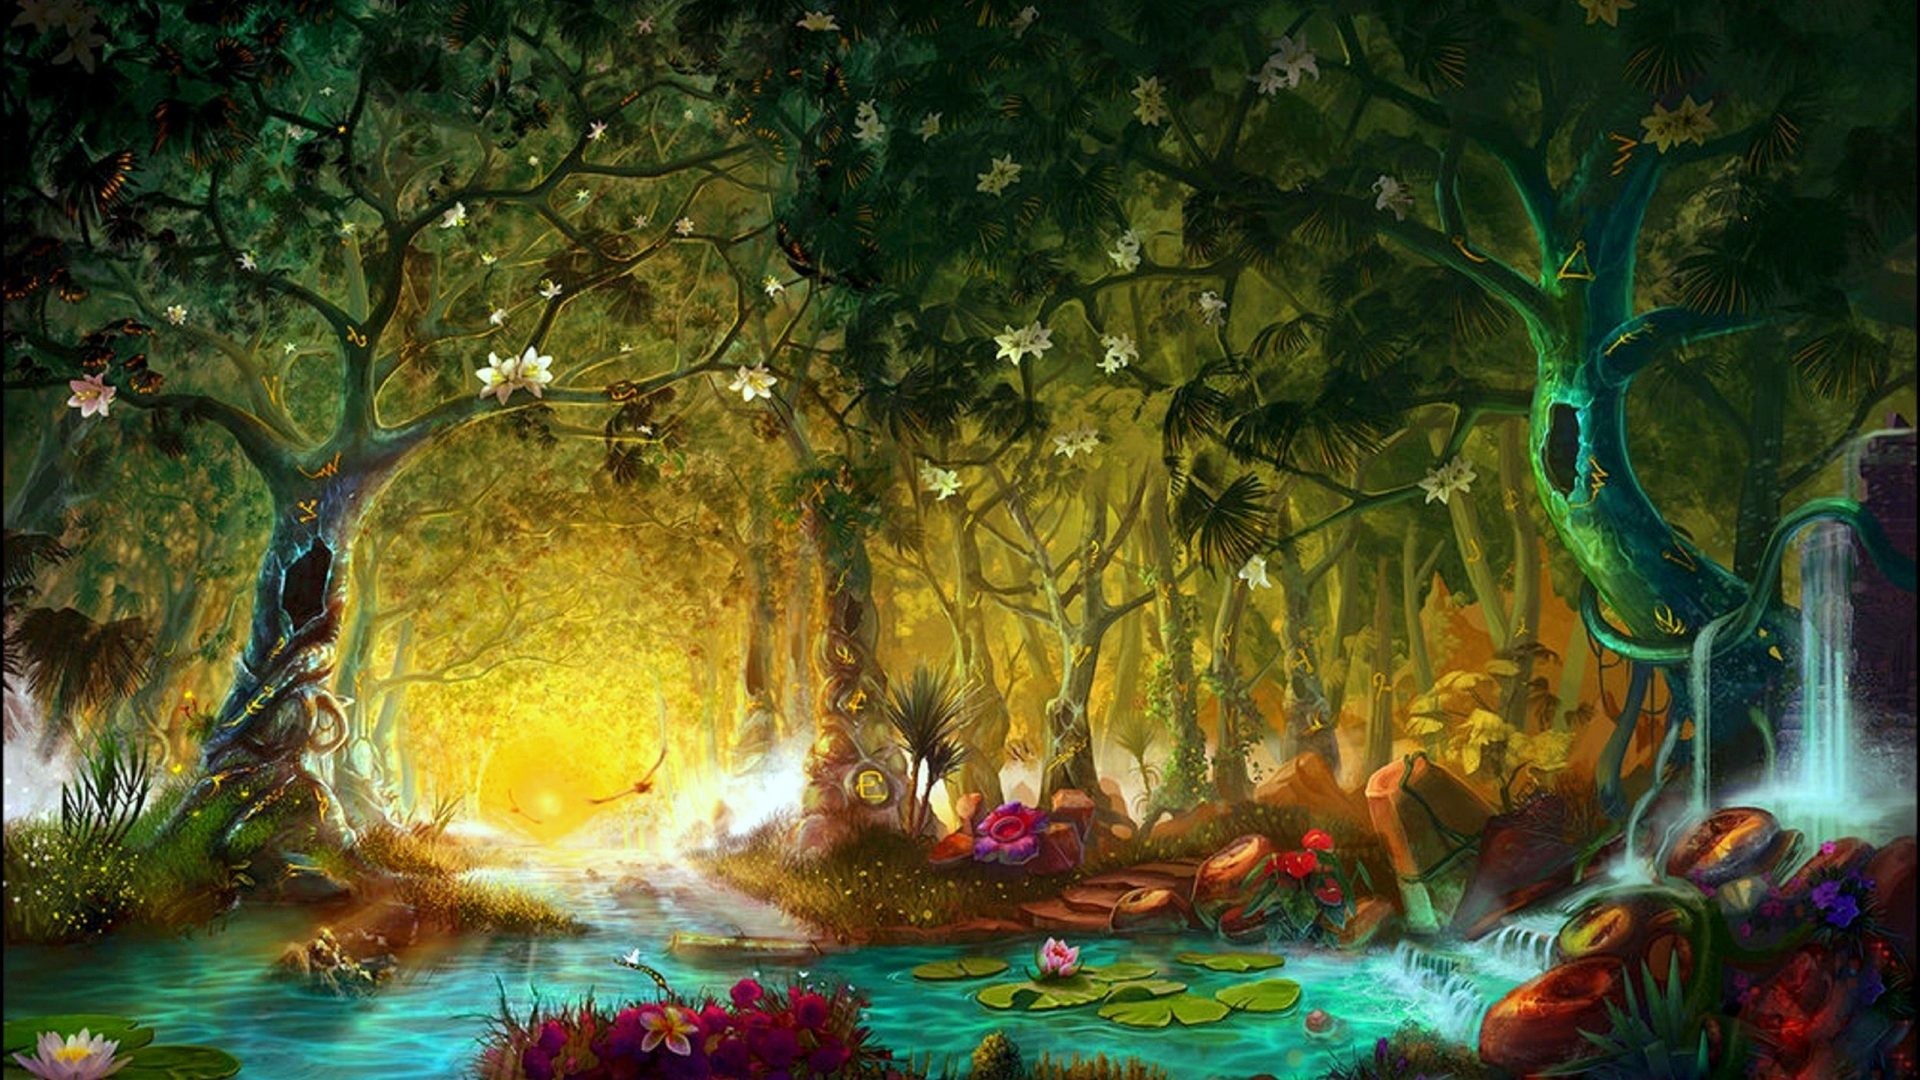 1920x1080 Enchanted Tag - Forests Nature Lotus Pond Birds Butterflies Enchanted  Animals Spring Cool Designs Paintings Attractions